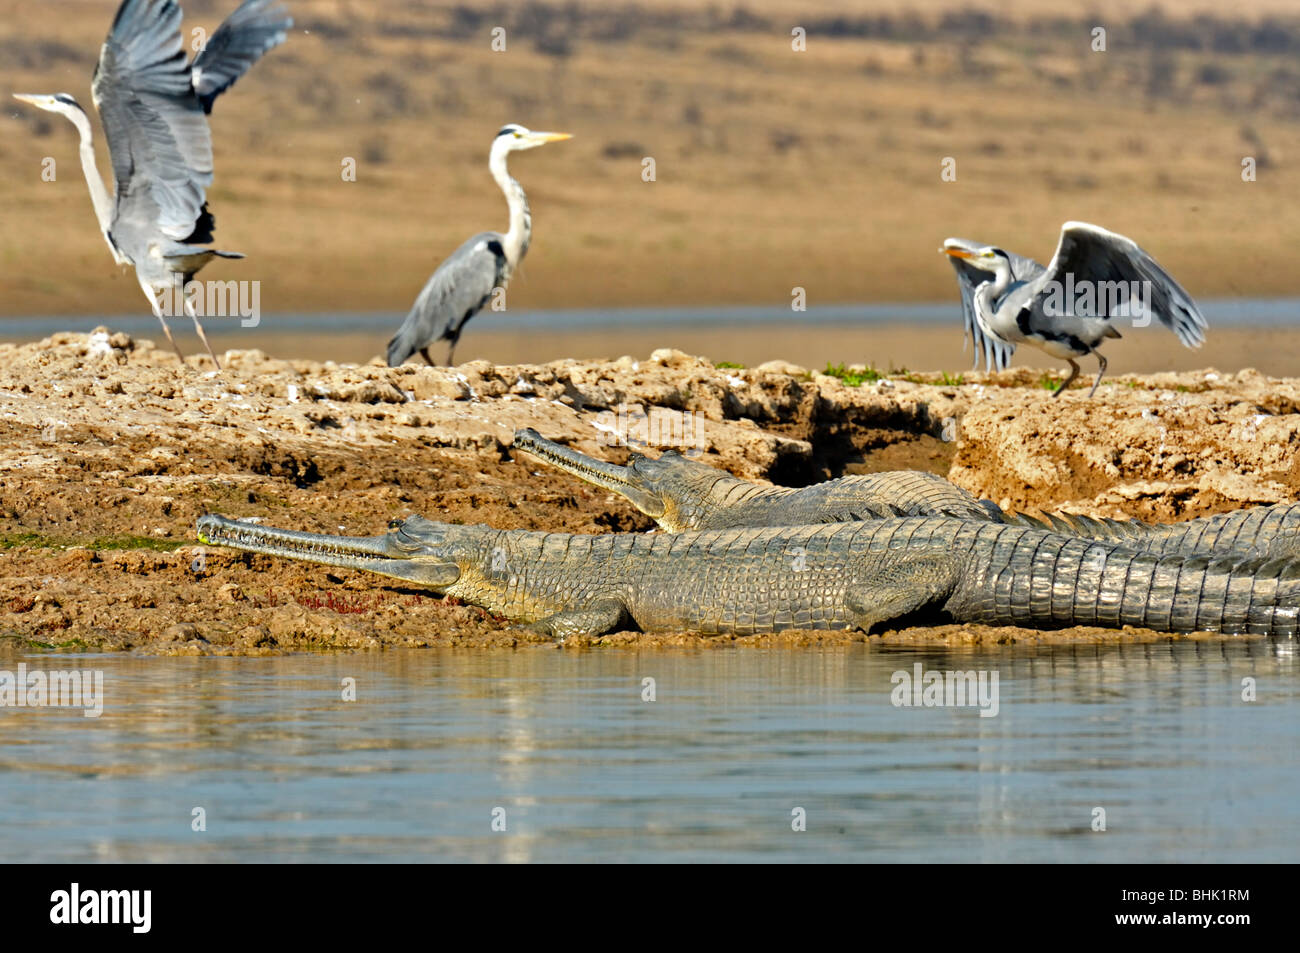 Gharial or Gavial (Gavialis gangeticus) basking in the sun in Chambal river with a Grey Heron in the background Stock Photo